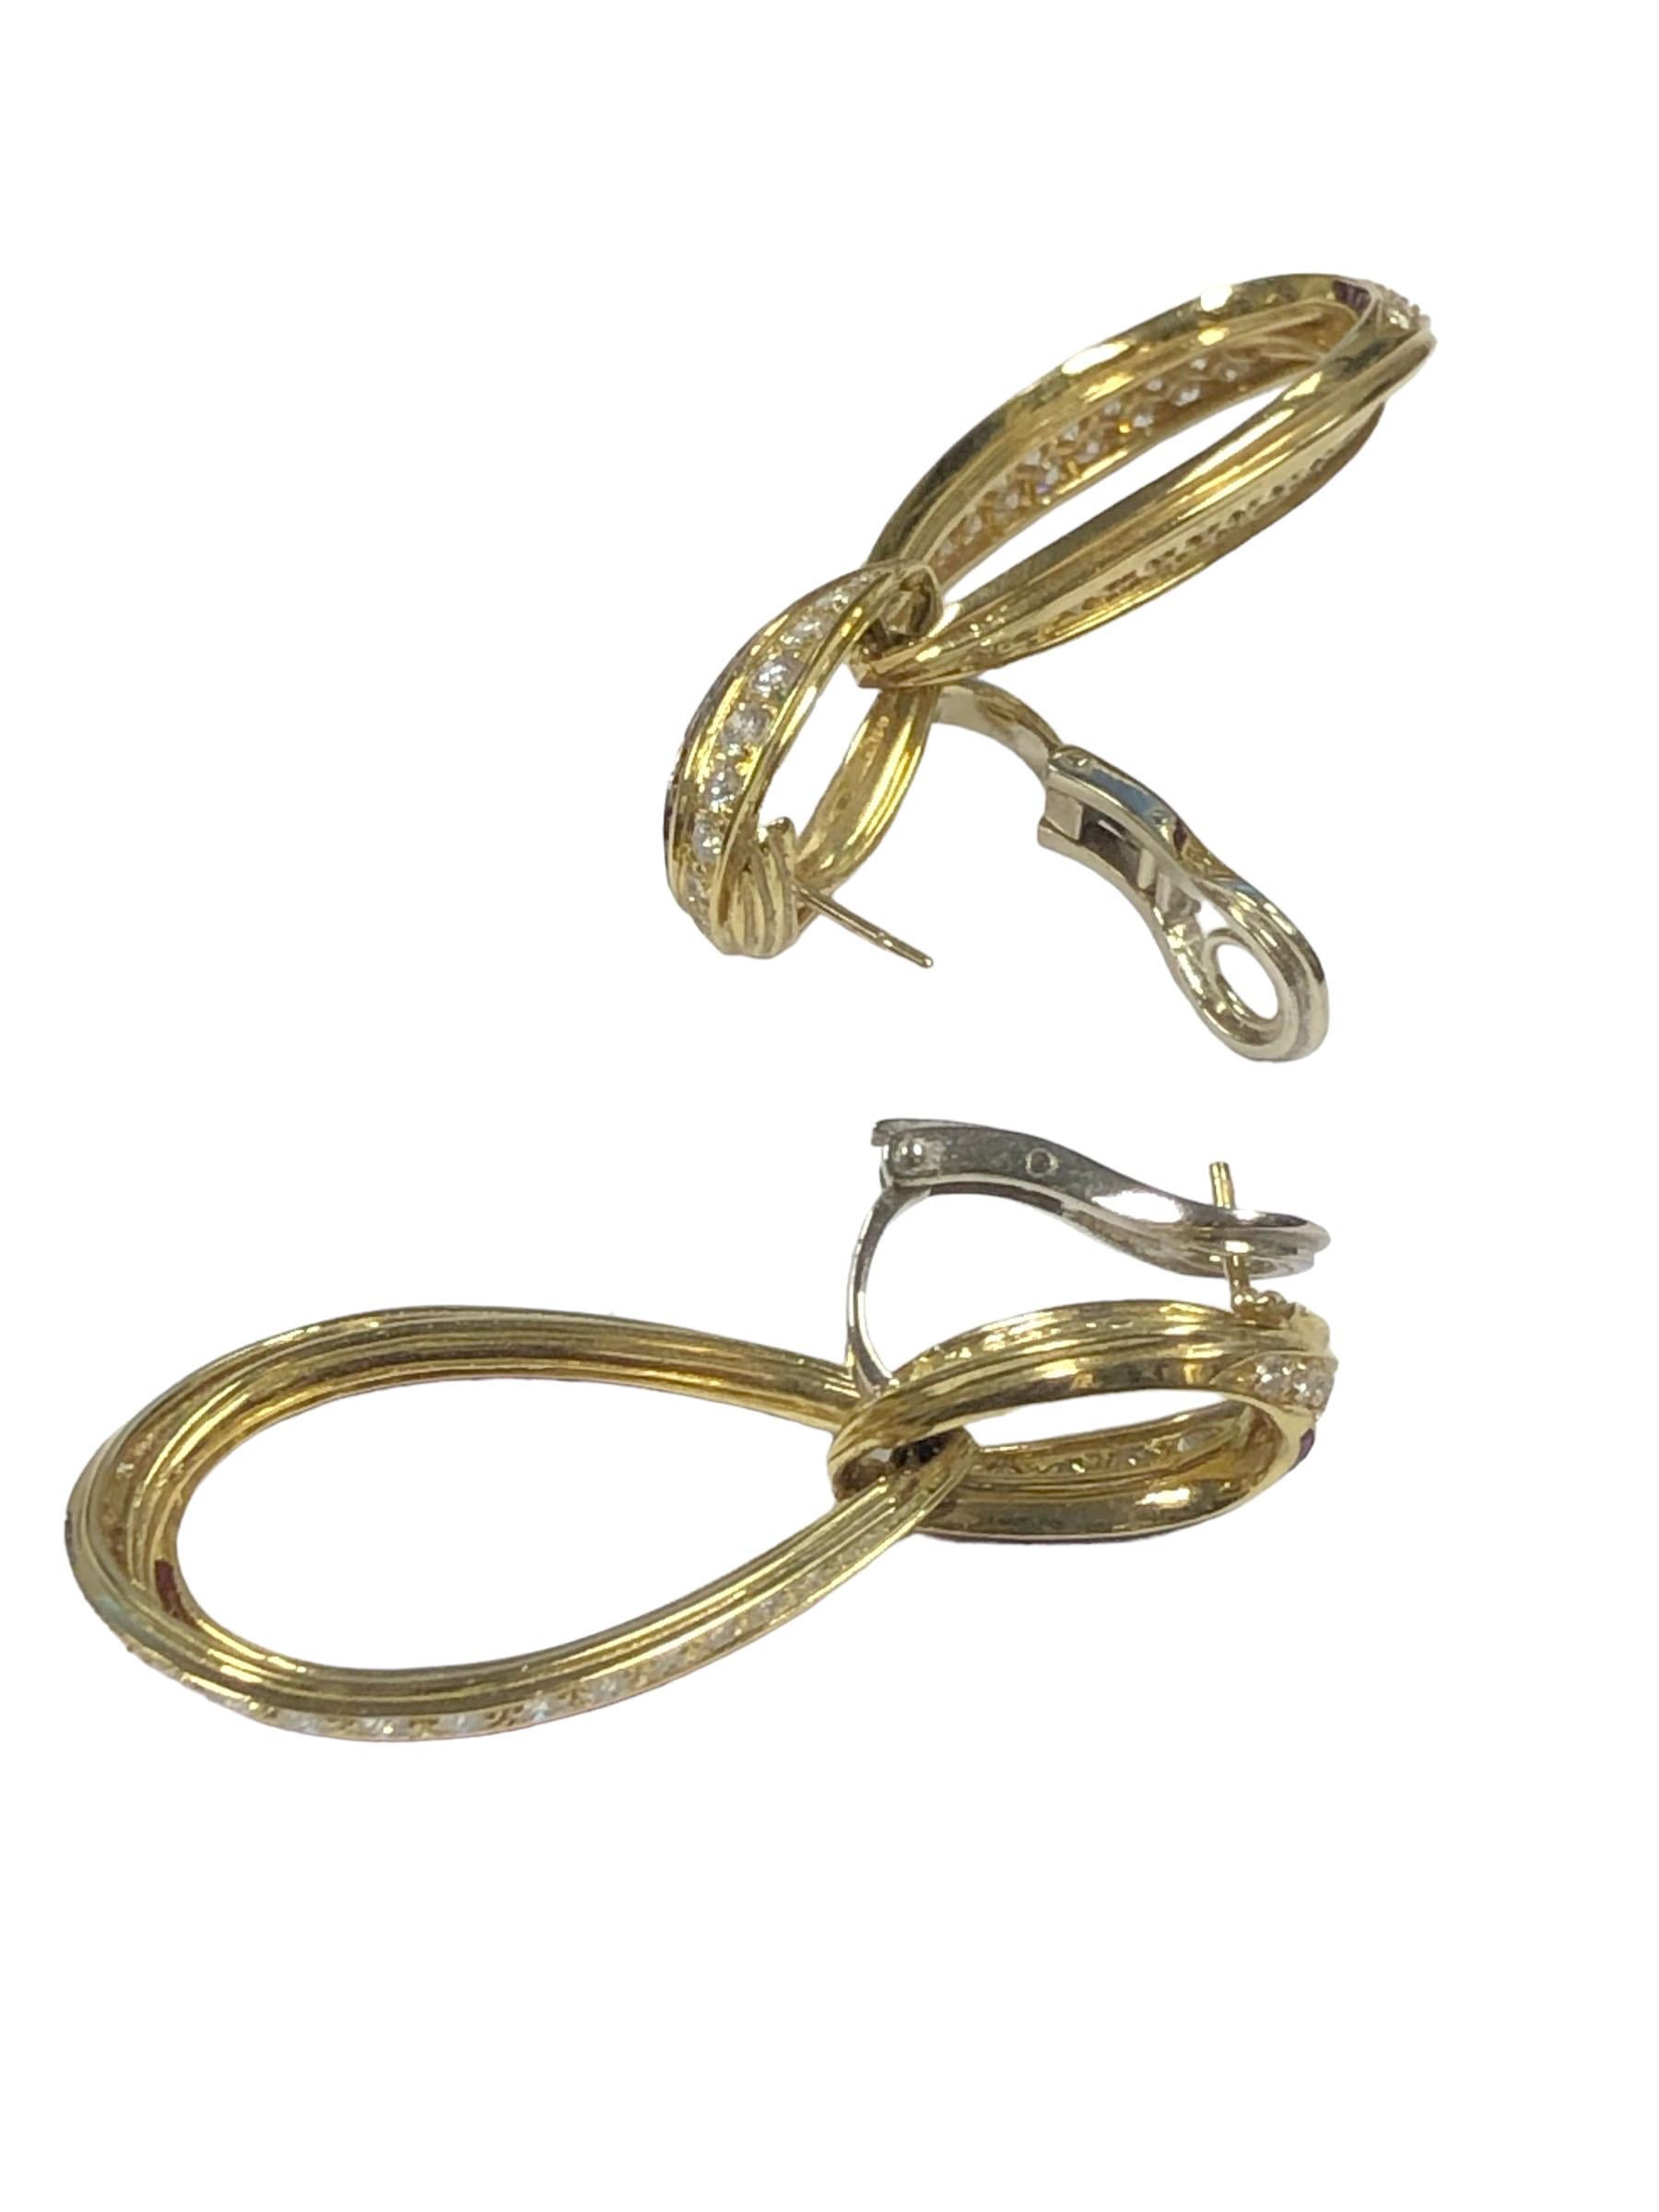 Circa 2000 Sidney Garber Inside out Hoop Dangle Earrings, These amazing Earrings measure 2 inches in length and 1 inch wide, the bottom sections are separately attached so that that dangle and move,  Pave set inside and out with Round Brilliant cut